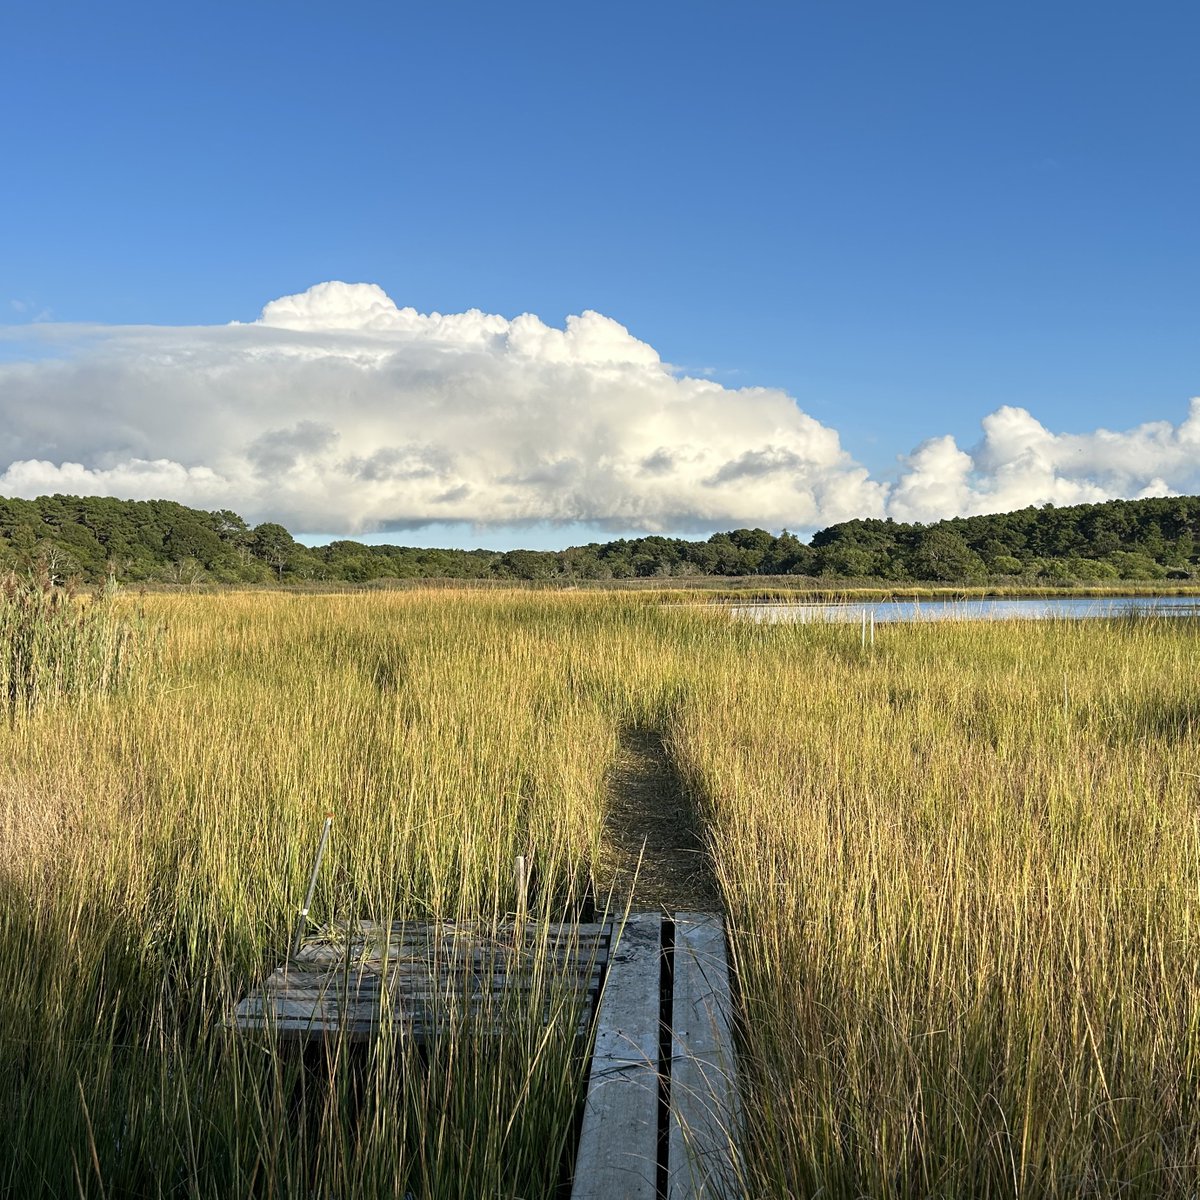 Wetlands may be less extensive than other ecosystems in the U.S., such as forests and grasslands, but they can capture and store more carbon per unit area, making them an incredible climate change mitigation tool. Learn more: ow.ly/jqo050Rf1E7